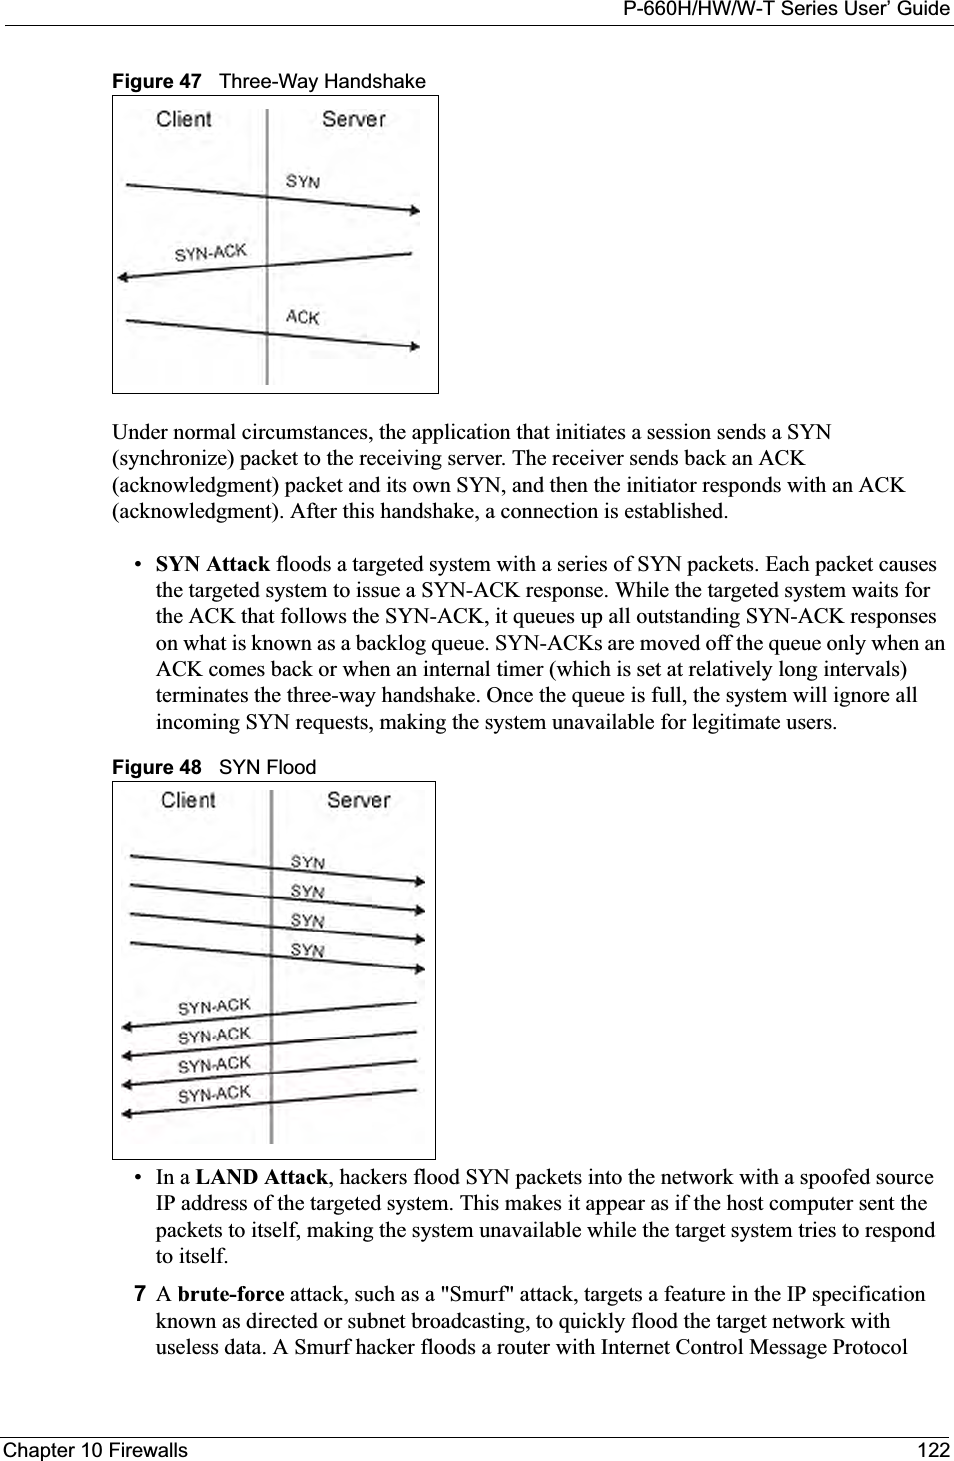 P-660H/HW/W-T Series User’ GuideChapter 10 Firewalls 122Figure 47   Three-Way HandshakeUnder normal circumstances, the application that initiates a session sends a SYN (synchronize) packet to the receiving server. The receiver sends back an ACK (acknowledgment) packet and its own SYN, and then the initiator responds with an ACK (acknowledgment). After this handshake, a connection is established. •SYN Attack floods a targeted system with a series of SYN packets. Each packet causes the targeted system to issue a SYN-ACK response. While the targeted system waits for the ACK that follows the SYN-ACK, it queues up all outstanding SYN-ACK responses on what is known as a backlog queue. SYN-ACKs are moved off the queue only when an ACK comes back or when an internal timer (which is set at relatively long intervals) terminates the three-way handshake. Once the queue is full, the system will ignore all incoming SYN requests, making the system unavailable for legitimate users. Figure 48   SYN Flood•In a LAND Attack, hackers flood SYN packets into the network with a spoofed source IP address of the targeted system. This makes it appear as if the host computer sent the packets to itself, making the system unavailable while the target system tries to respond to itself. 7Abrute-force attack, such as a &quot;Smurf&quot; attack, targets a feature in the IP specification known as directed or subnet broadcasting, to quickly flood the target network with useless data. A Smurf hacker floods a router with Internet Control Message Protocol 